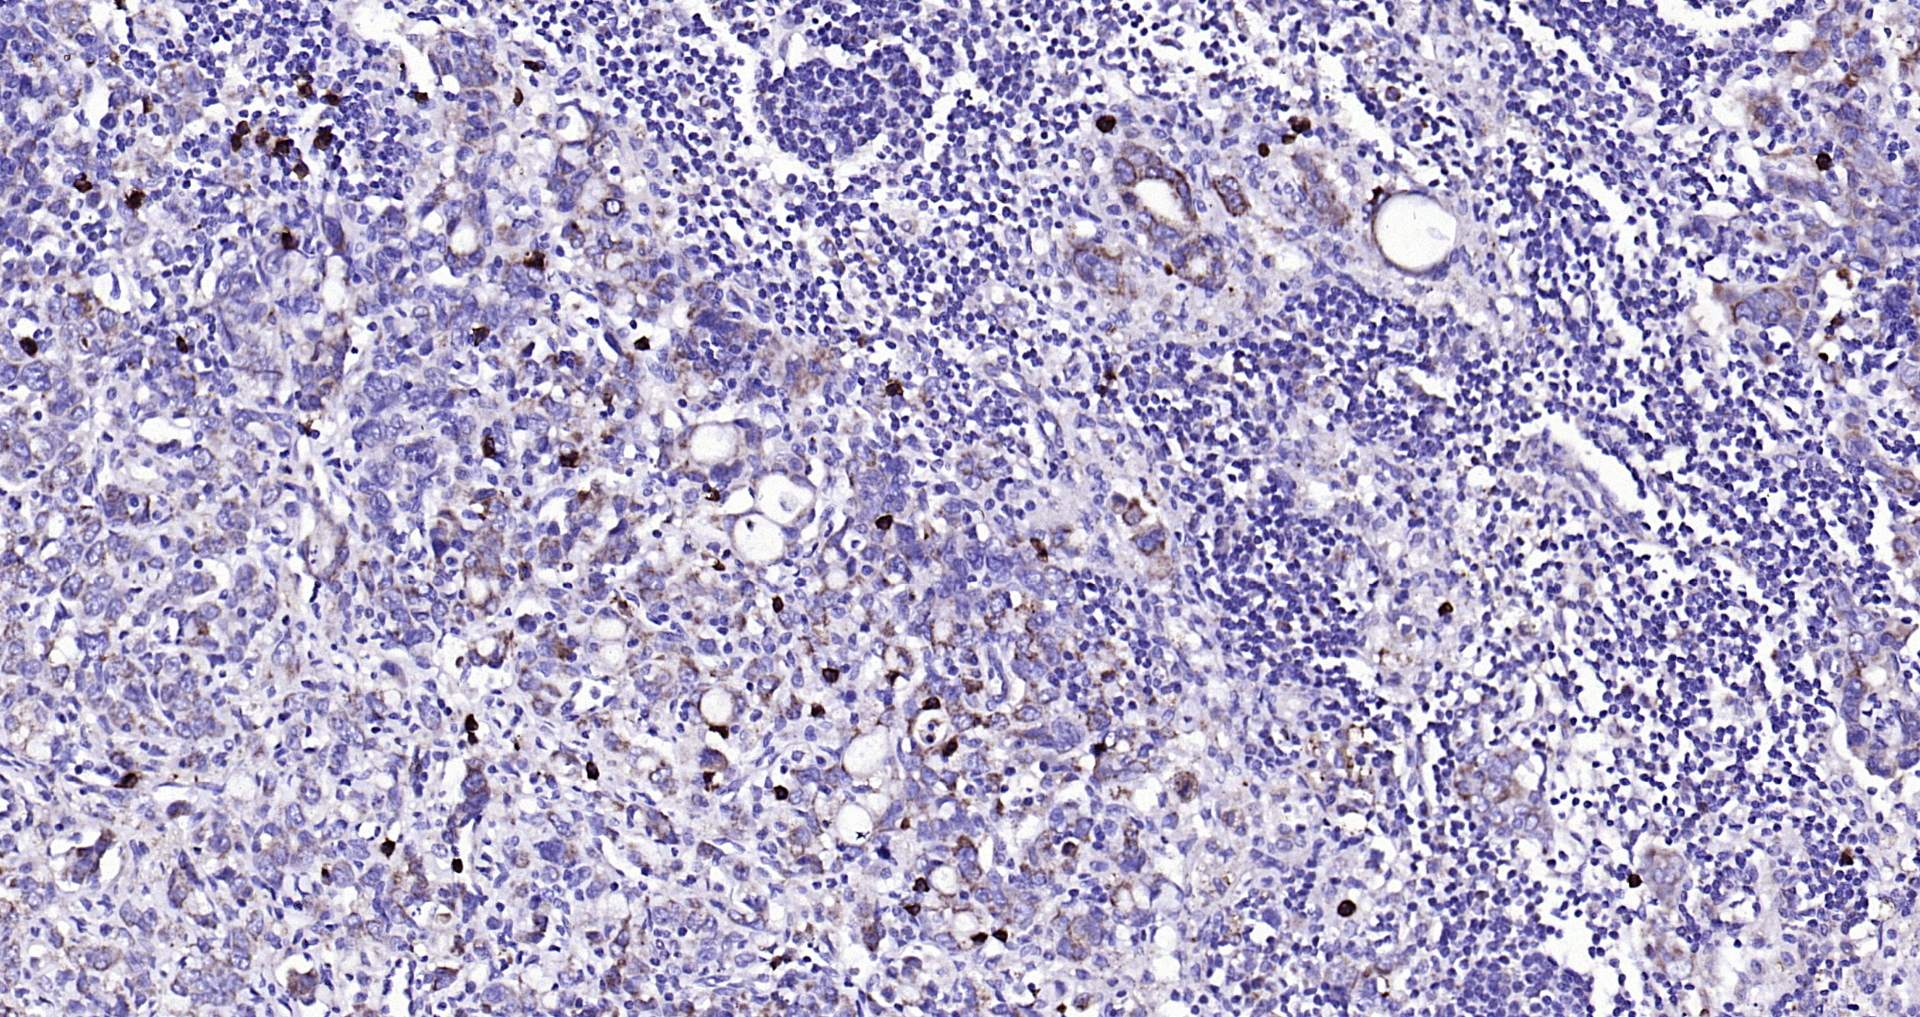 Paraformaldehyde-fixed, paraffin embedded Human gastric carcinoma; Antigen retrieval by boiling in sodium citrate buffer (pH6.0) for 15min; Block endogenous peroxidase by 3% hydrogen peroxide for 20 minutes; Blocking buffer (normal goat serum) at 37°C for 30min; Antibody incubation with CD134 Polyclonal Antibody, Unconjugated (bs-2685R) at 1:200 overnight at 4°C, DAB staining.